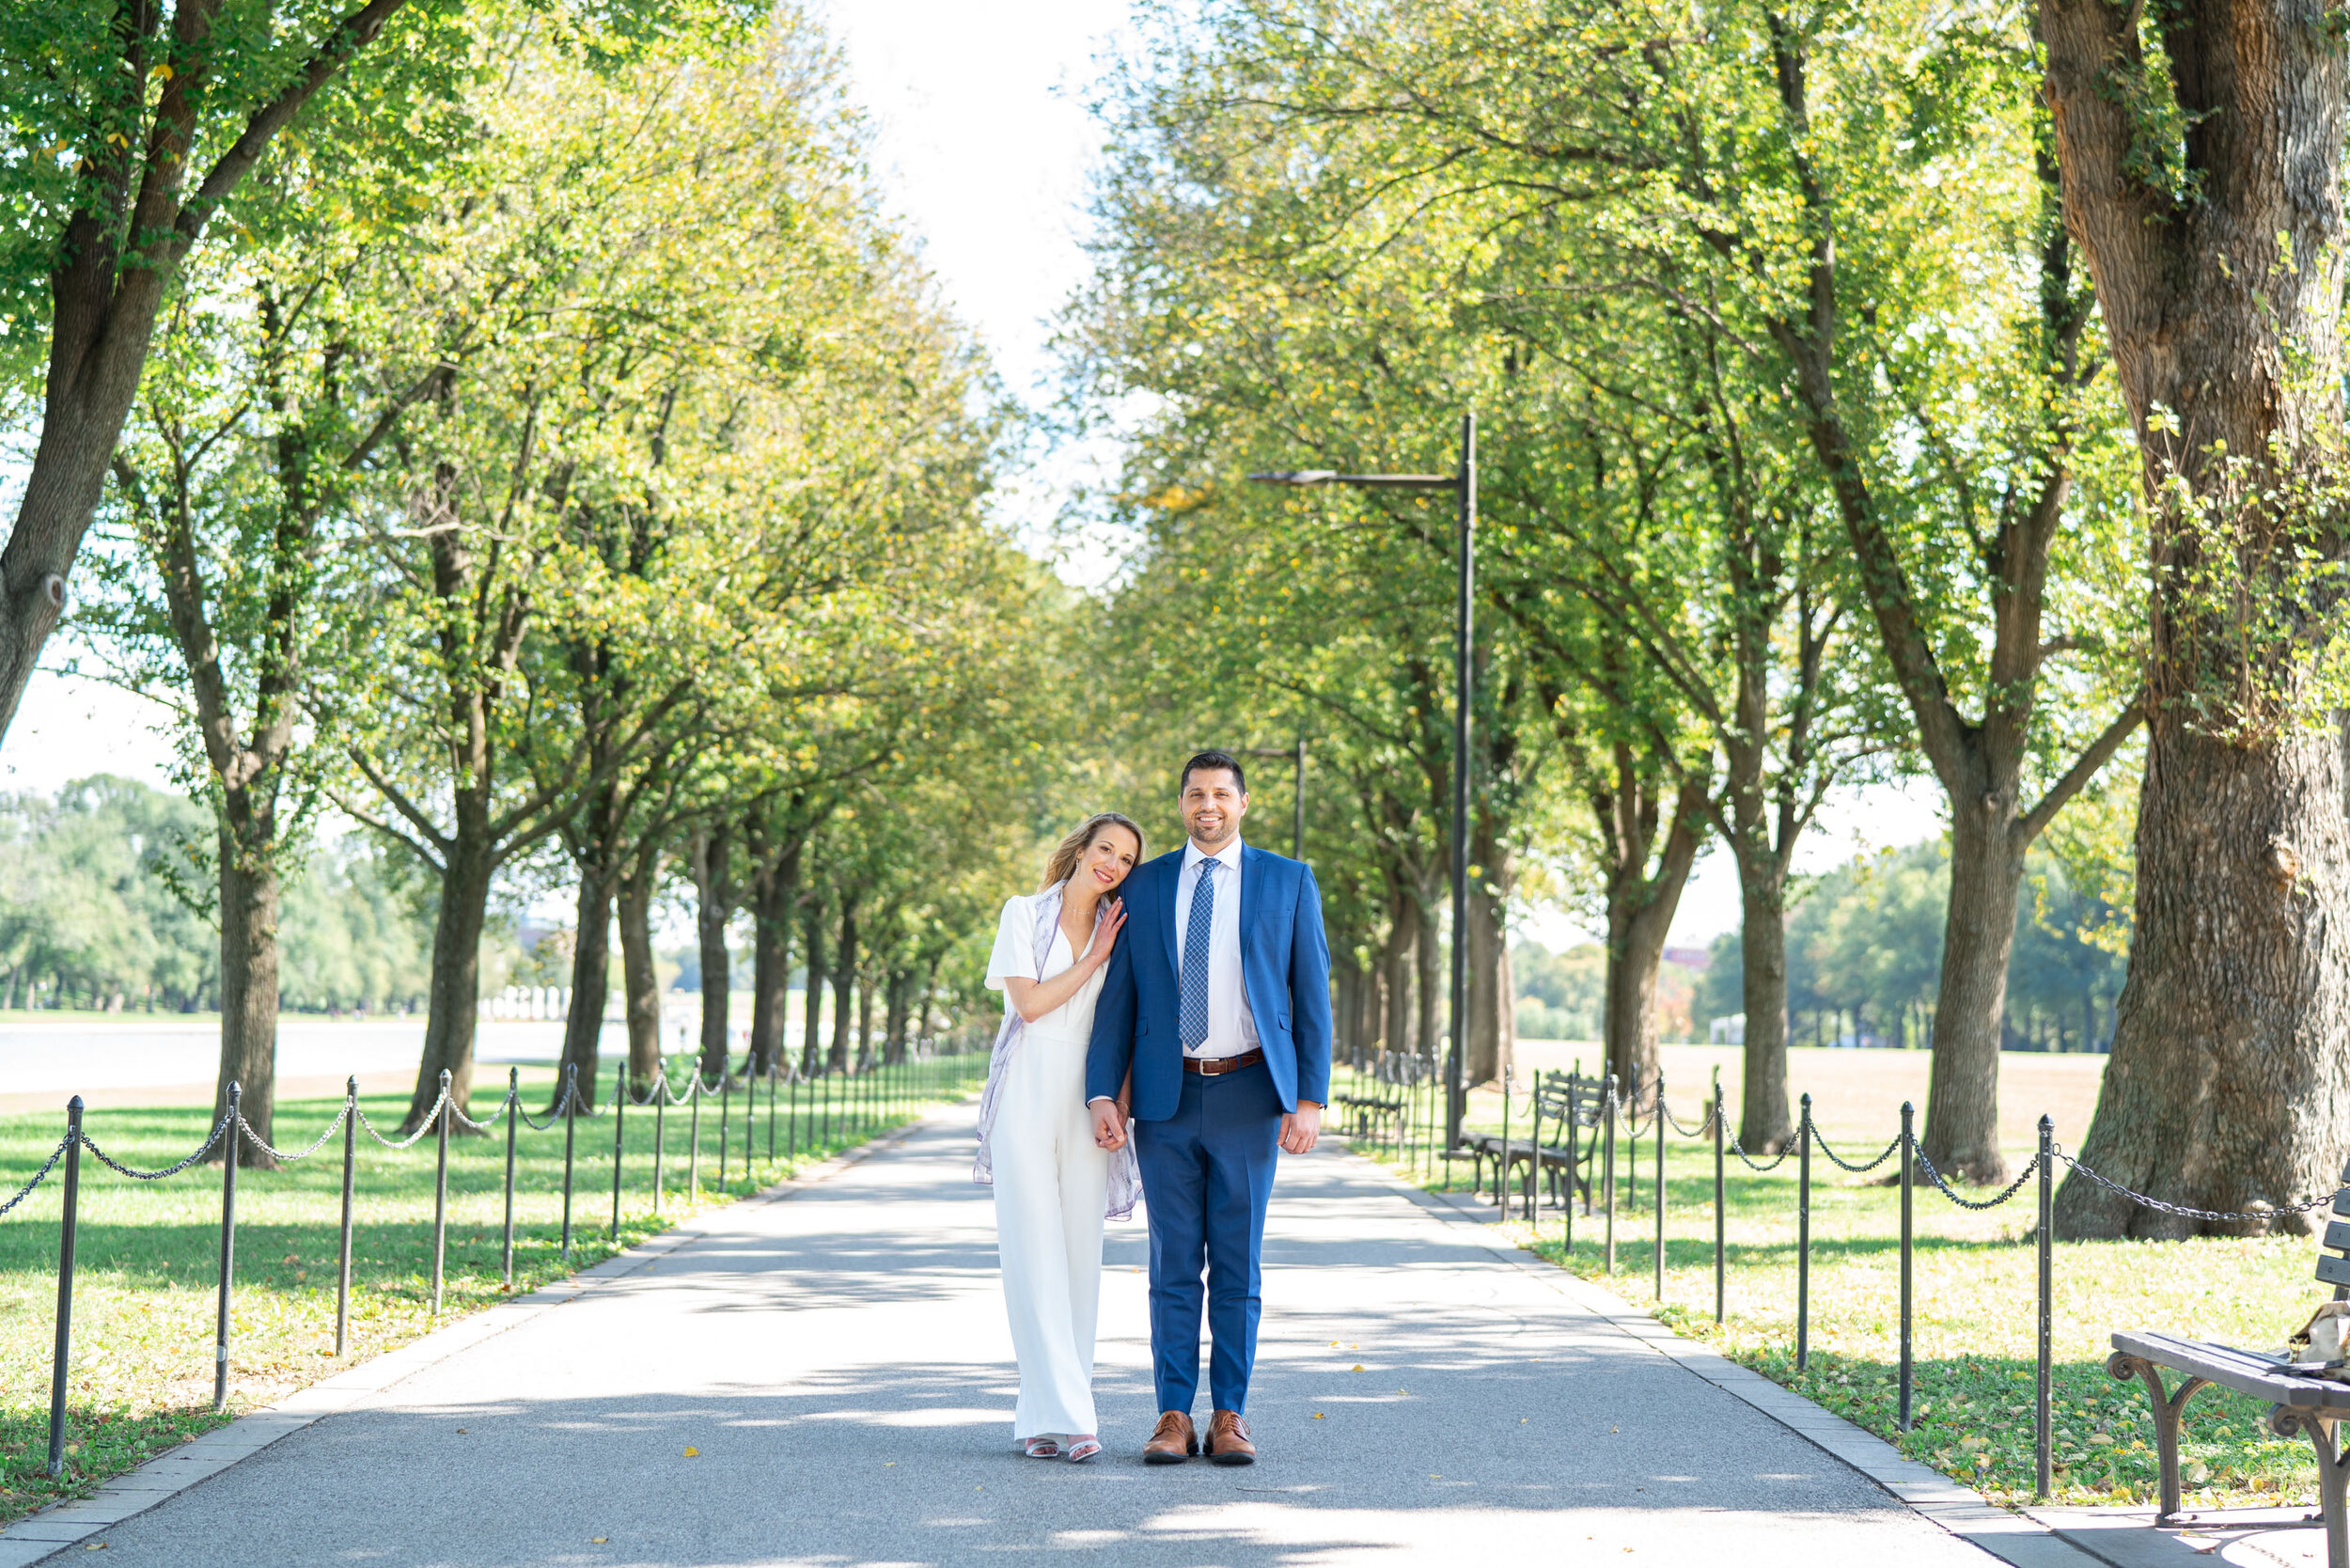 Engagement session at the national mall in DC